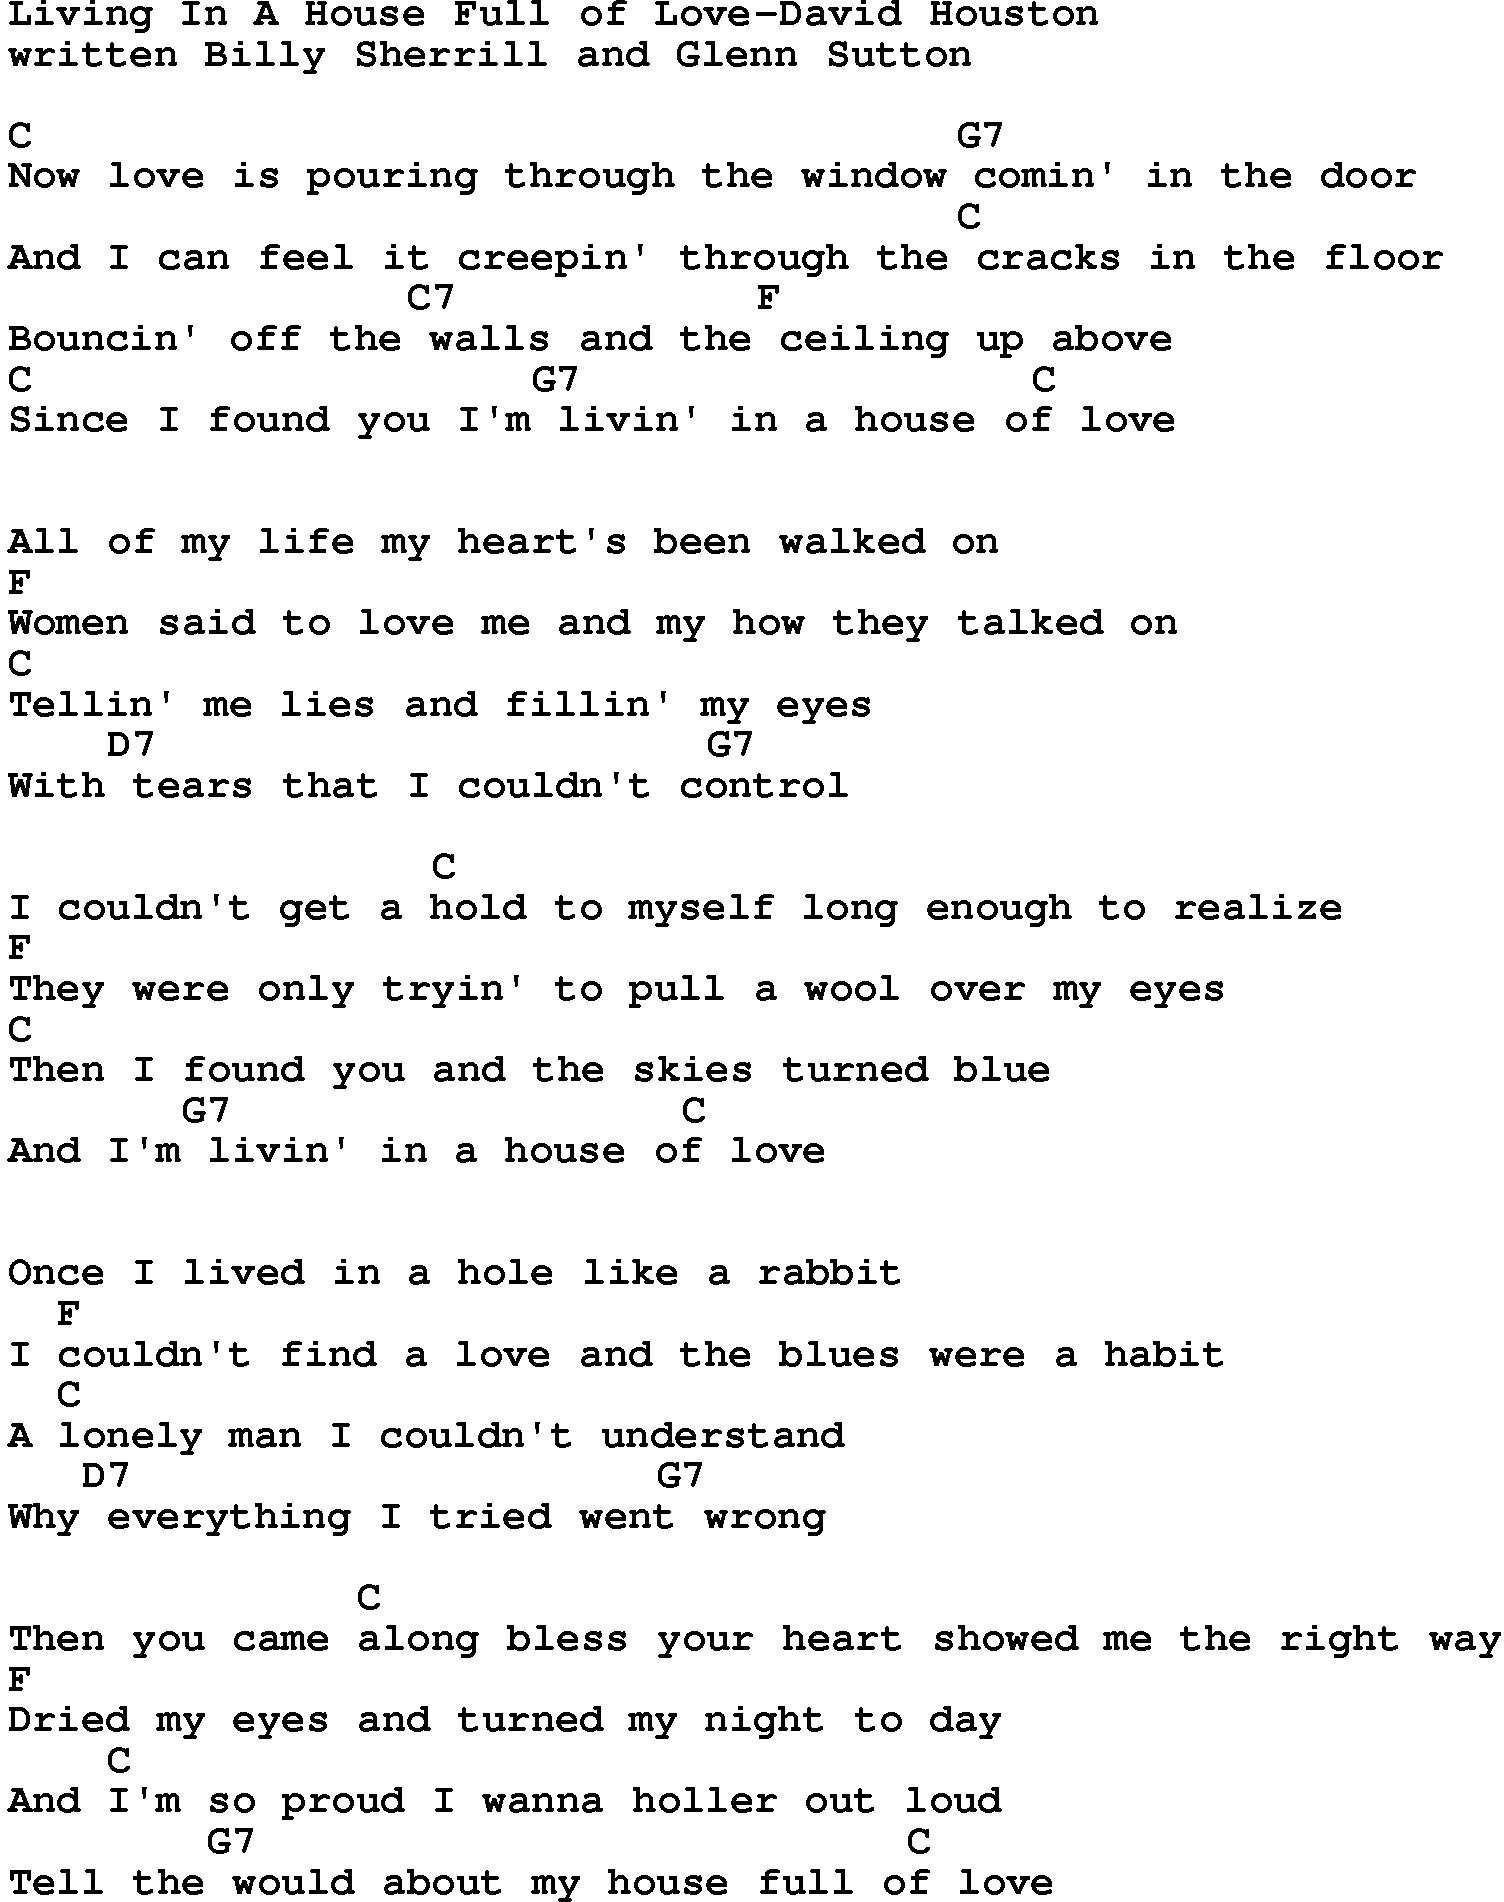 Country music song: Living In A House Full Of Love-David Houston lyrics and chords